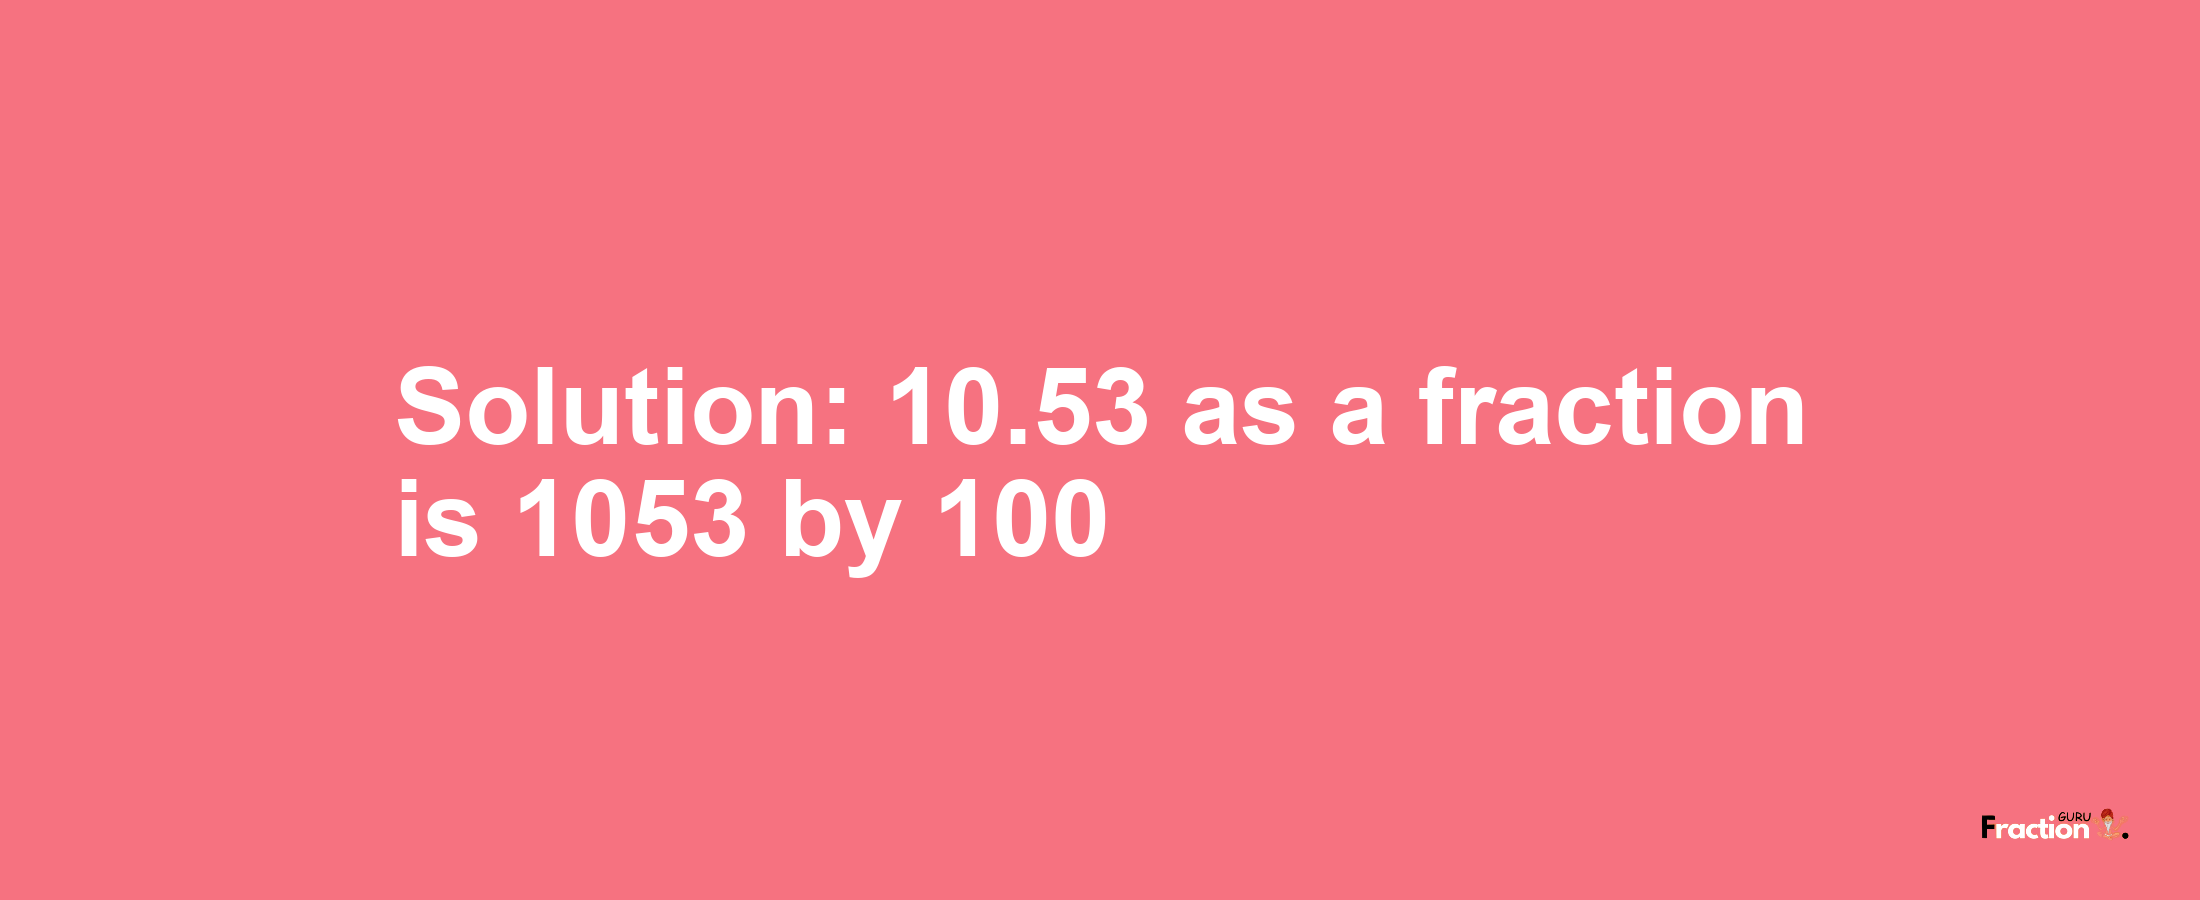 Solution:10.53 as a fraction is 1053/100